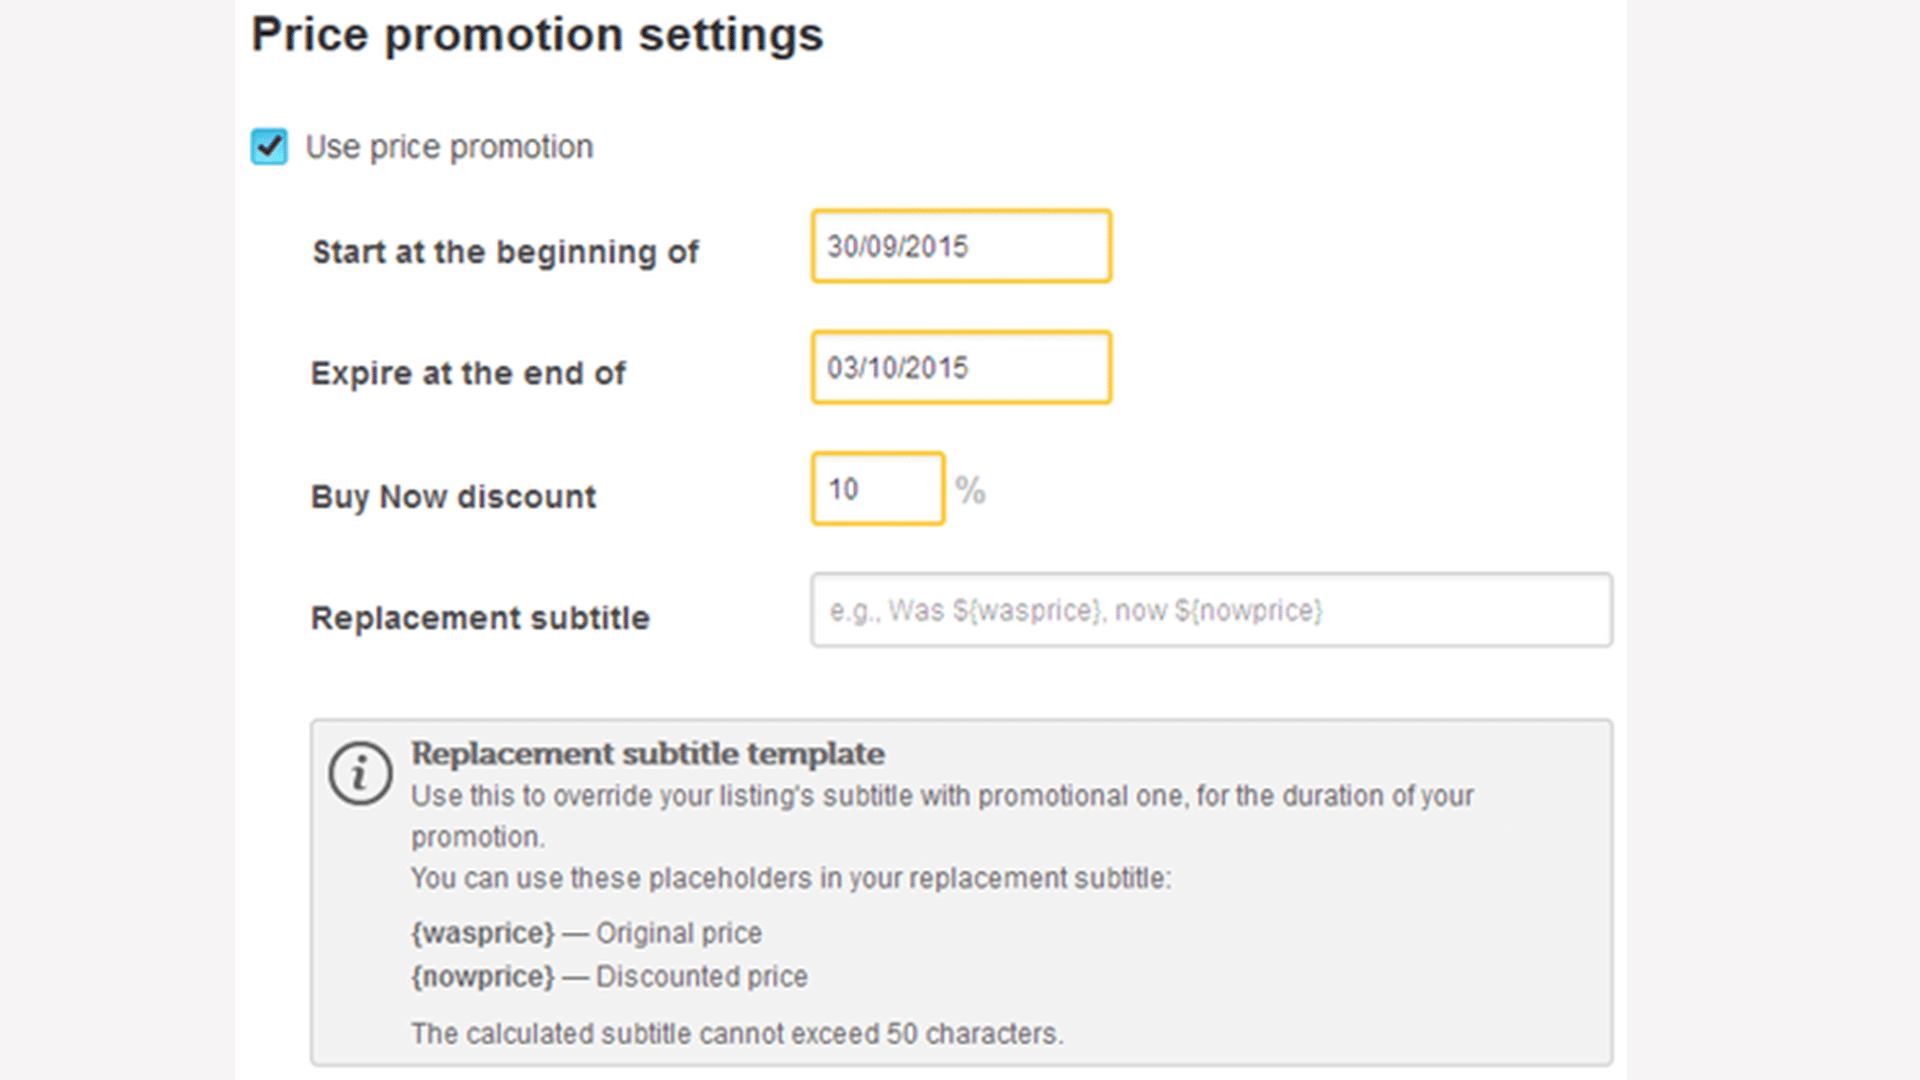 Price promotion settings